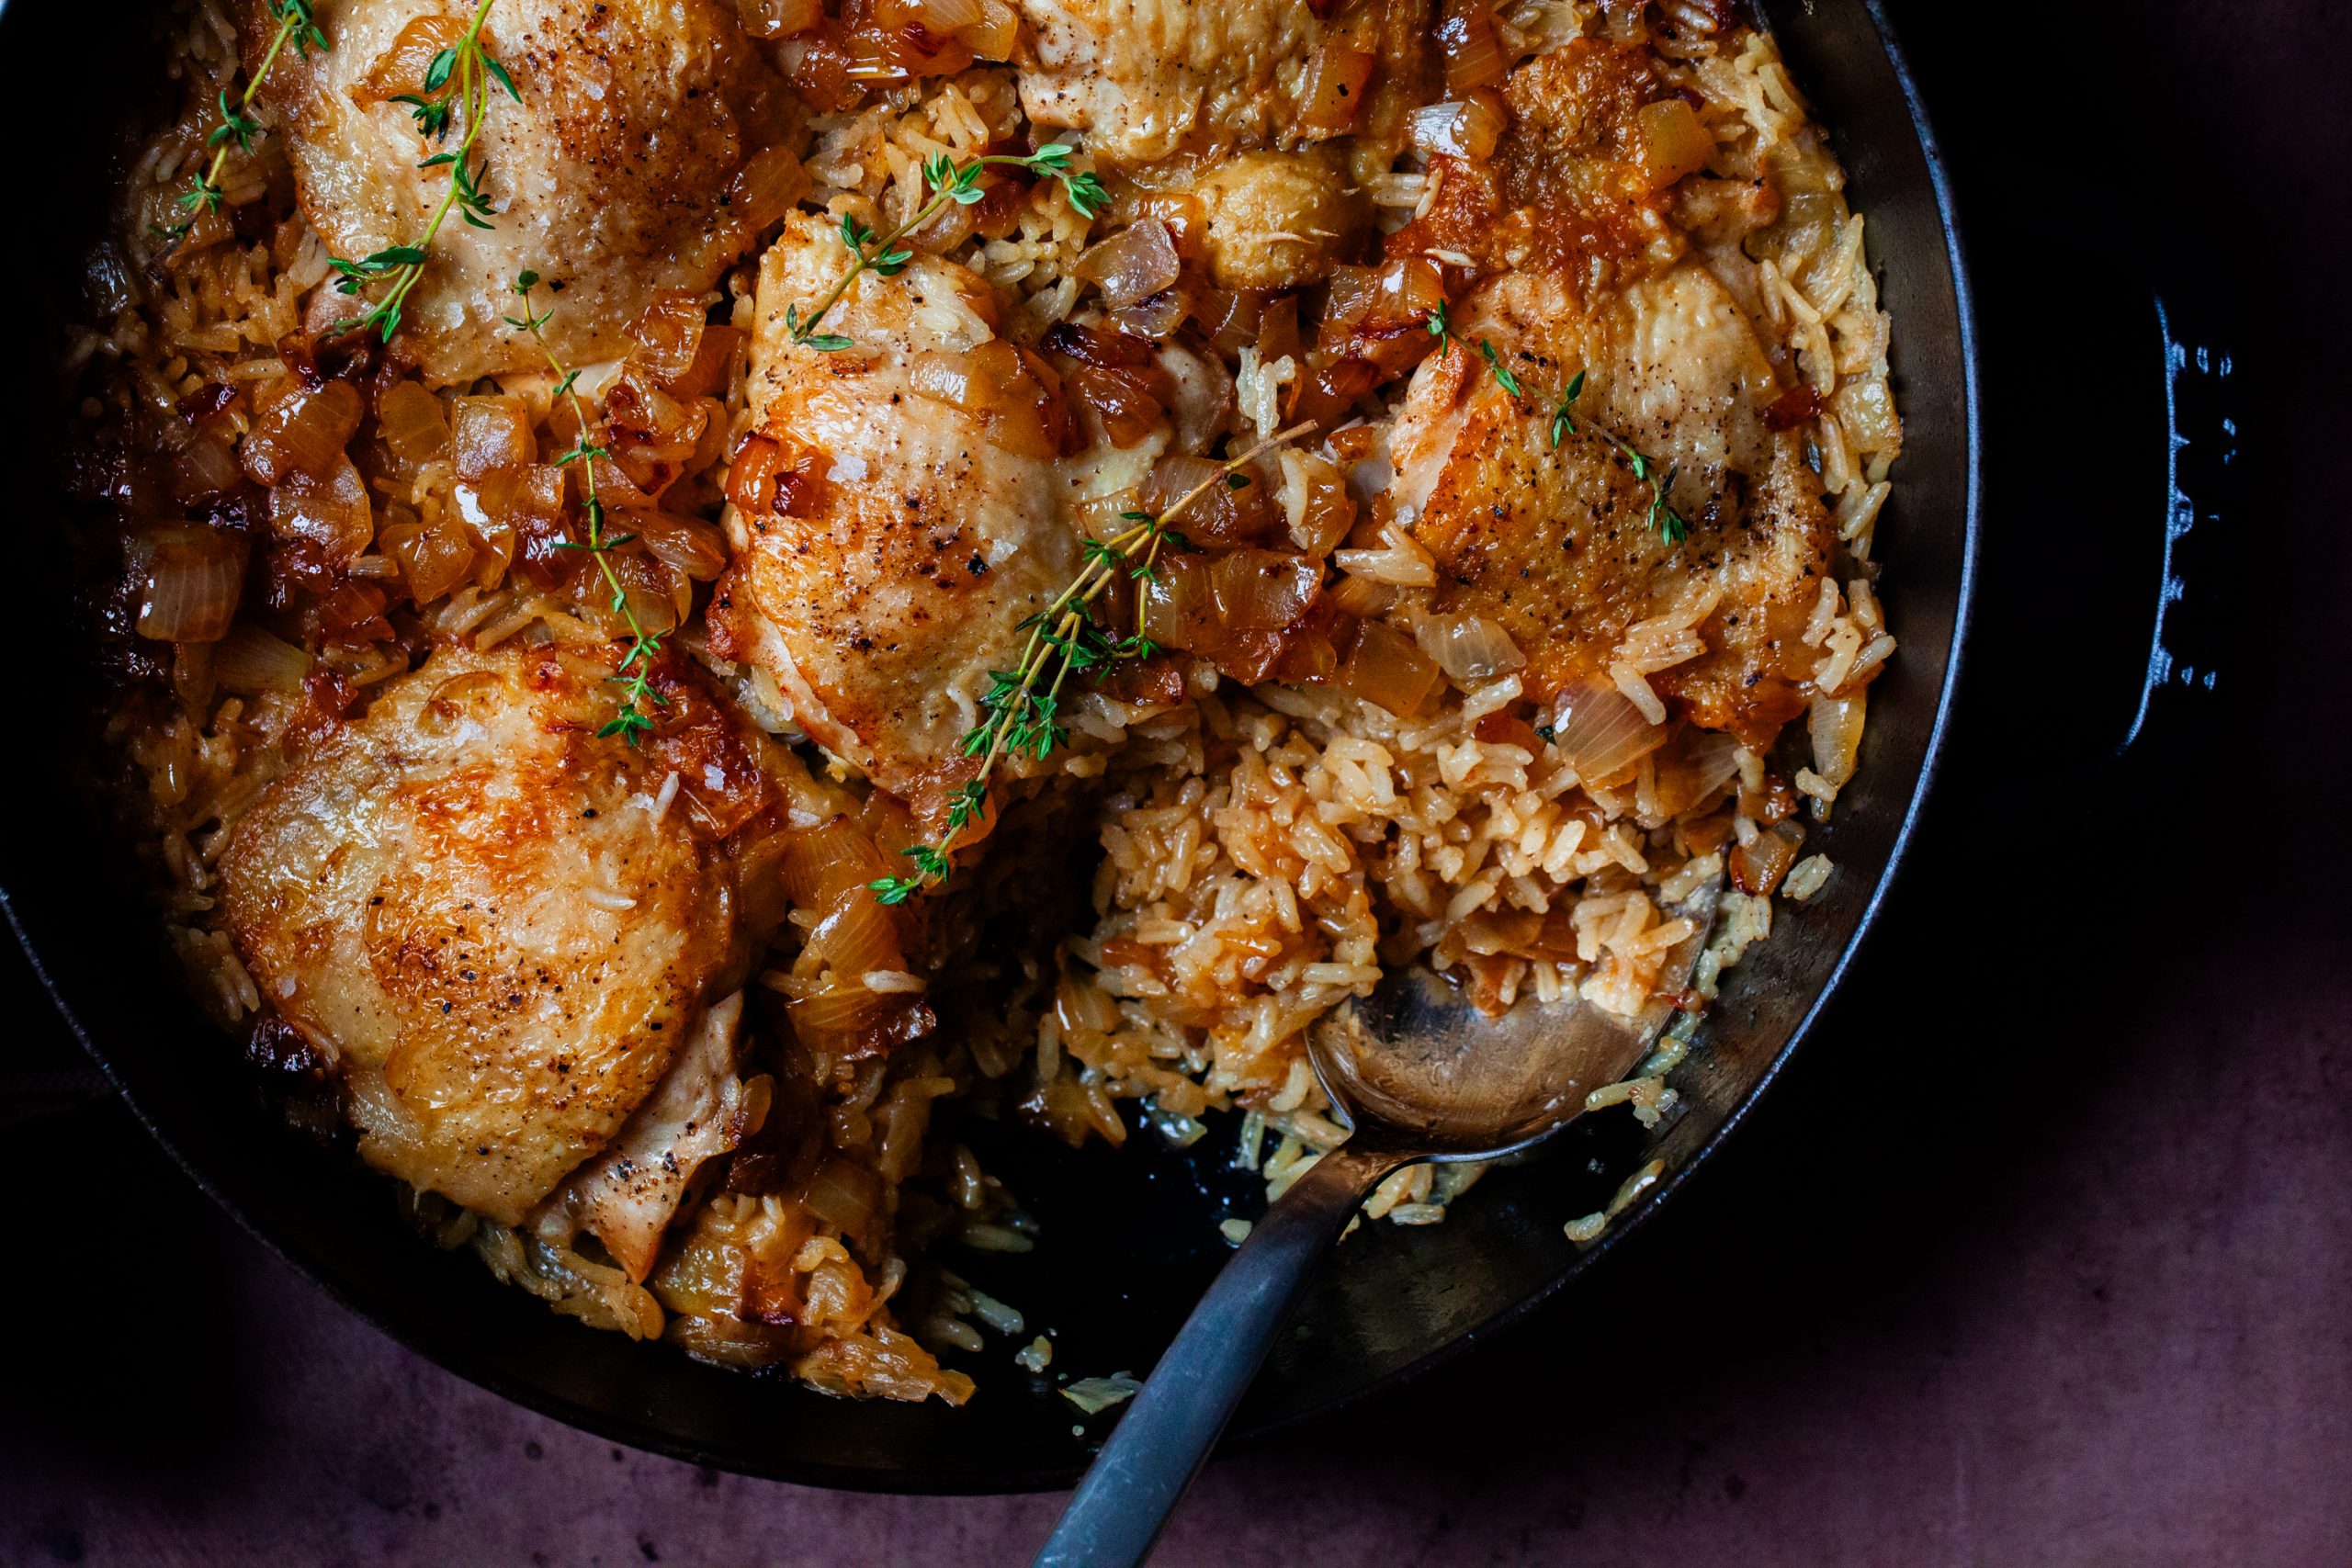 https://149401384.v2.pressablecdn.com/wp-content/uploads/2023/09/chicken-rice-with-buttered-onions-11-scaled.jpg